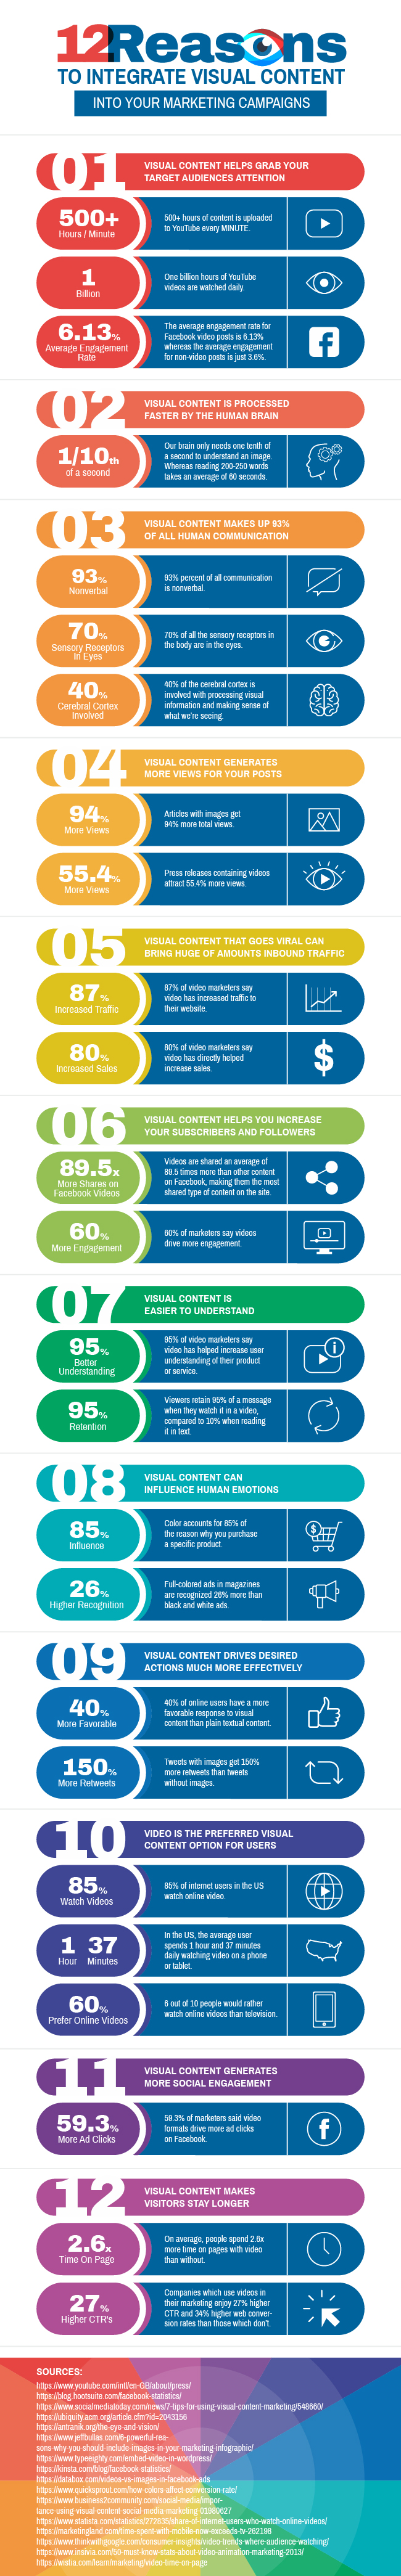 12 Reasons to Integrate Visual Content Into Your Marketing Campaigns 2 - 650 wide - 72dpi-01